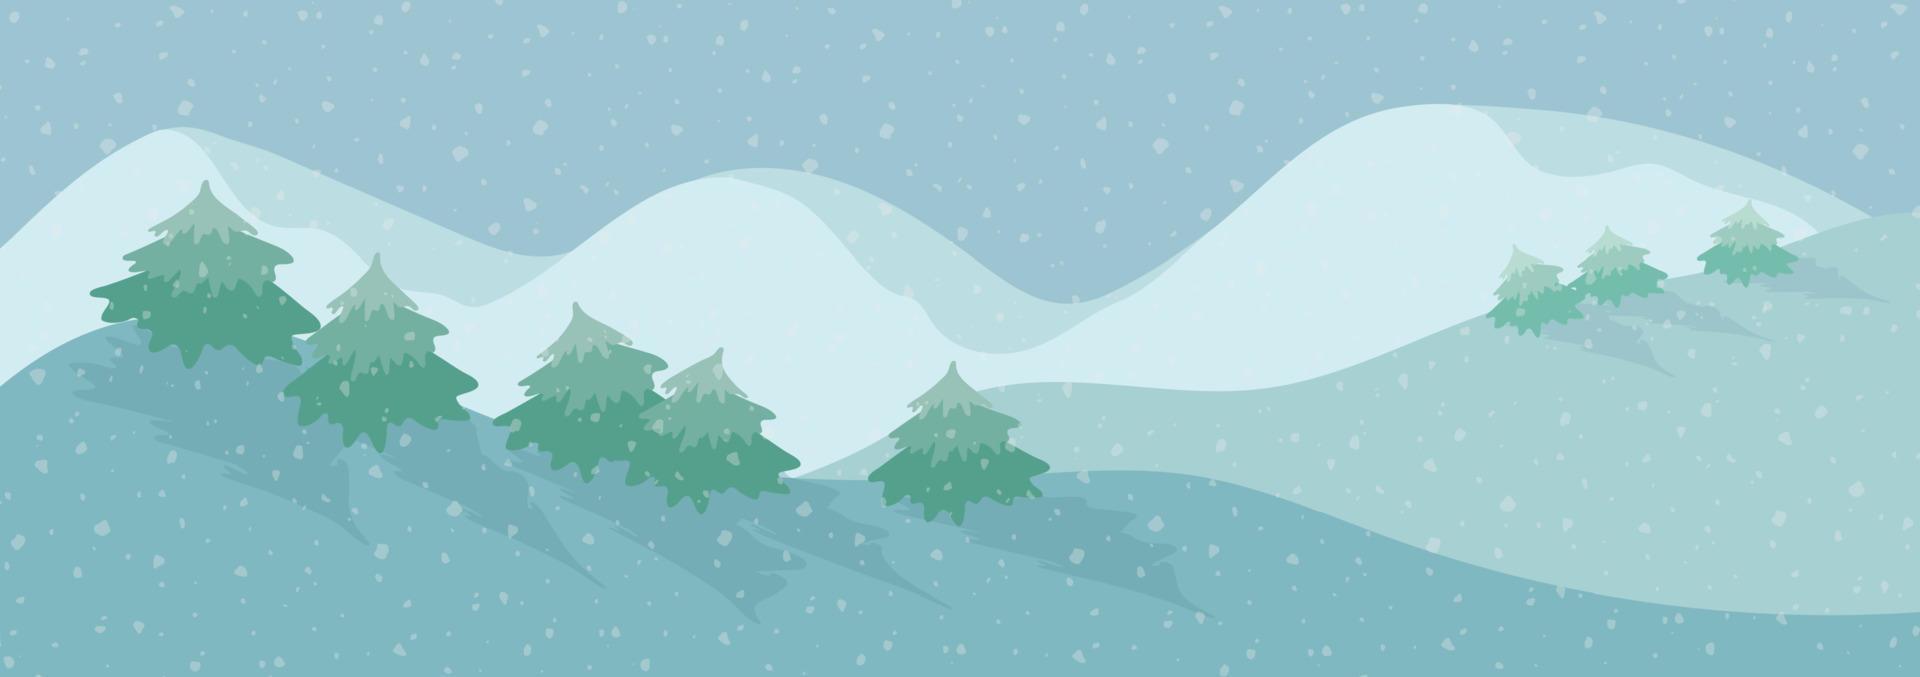 Landscape in blue tones with fir trees. Laconic Scandinavian landscape with mountains and trees. vector